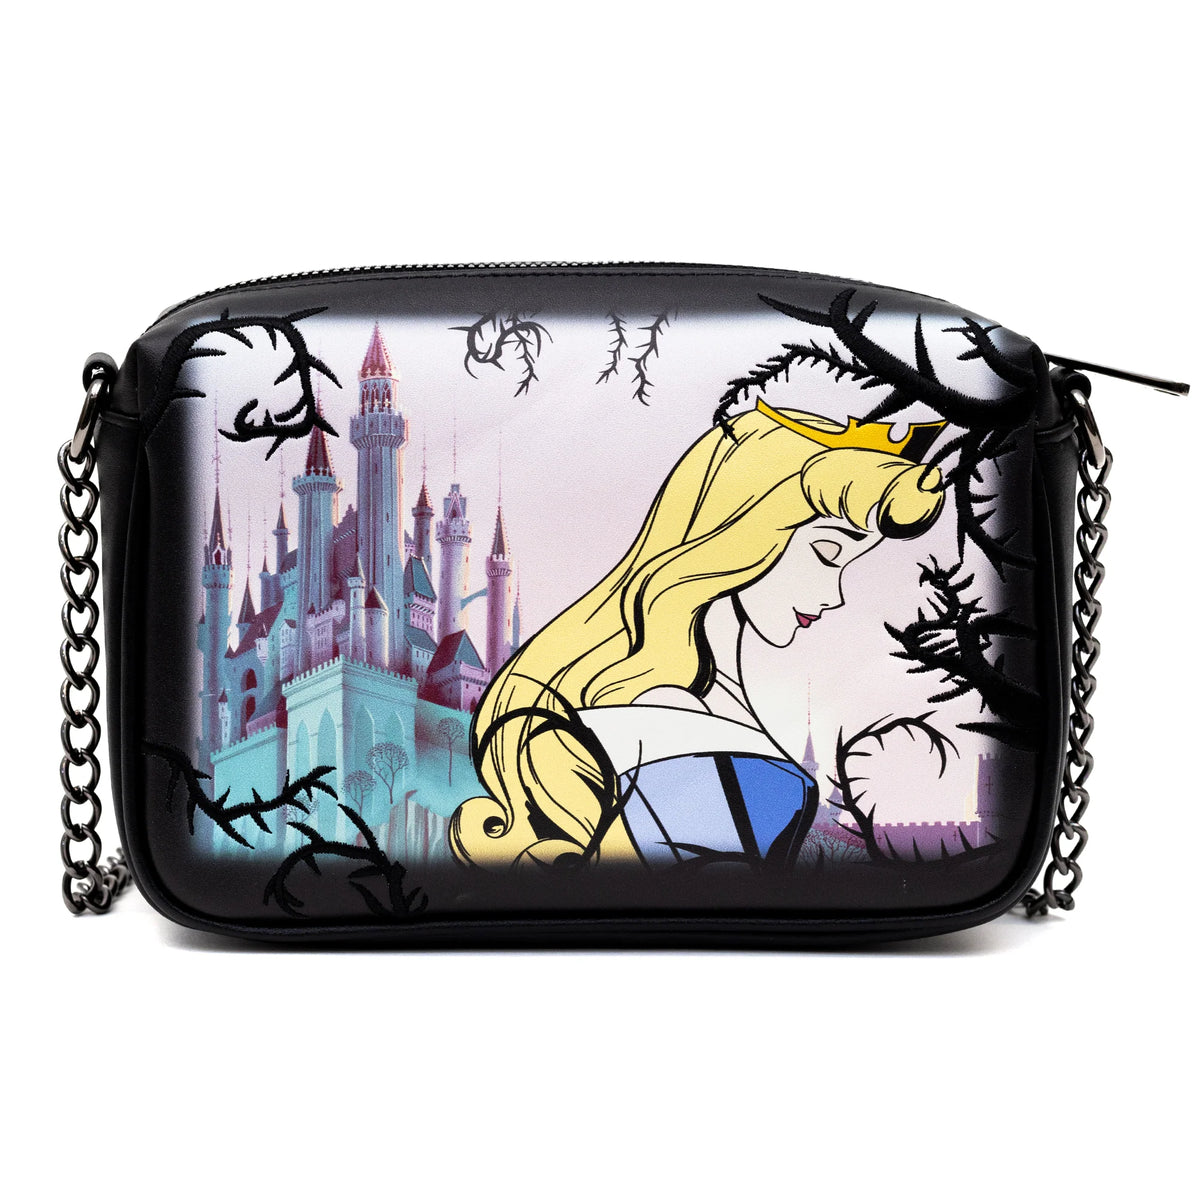 Disney Sleeping Beauty's Prince Phillip And Maleficent Dragon Scene With Princess Aurora And Castle Pose Crossbody